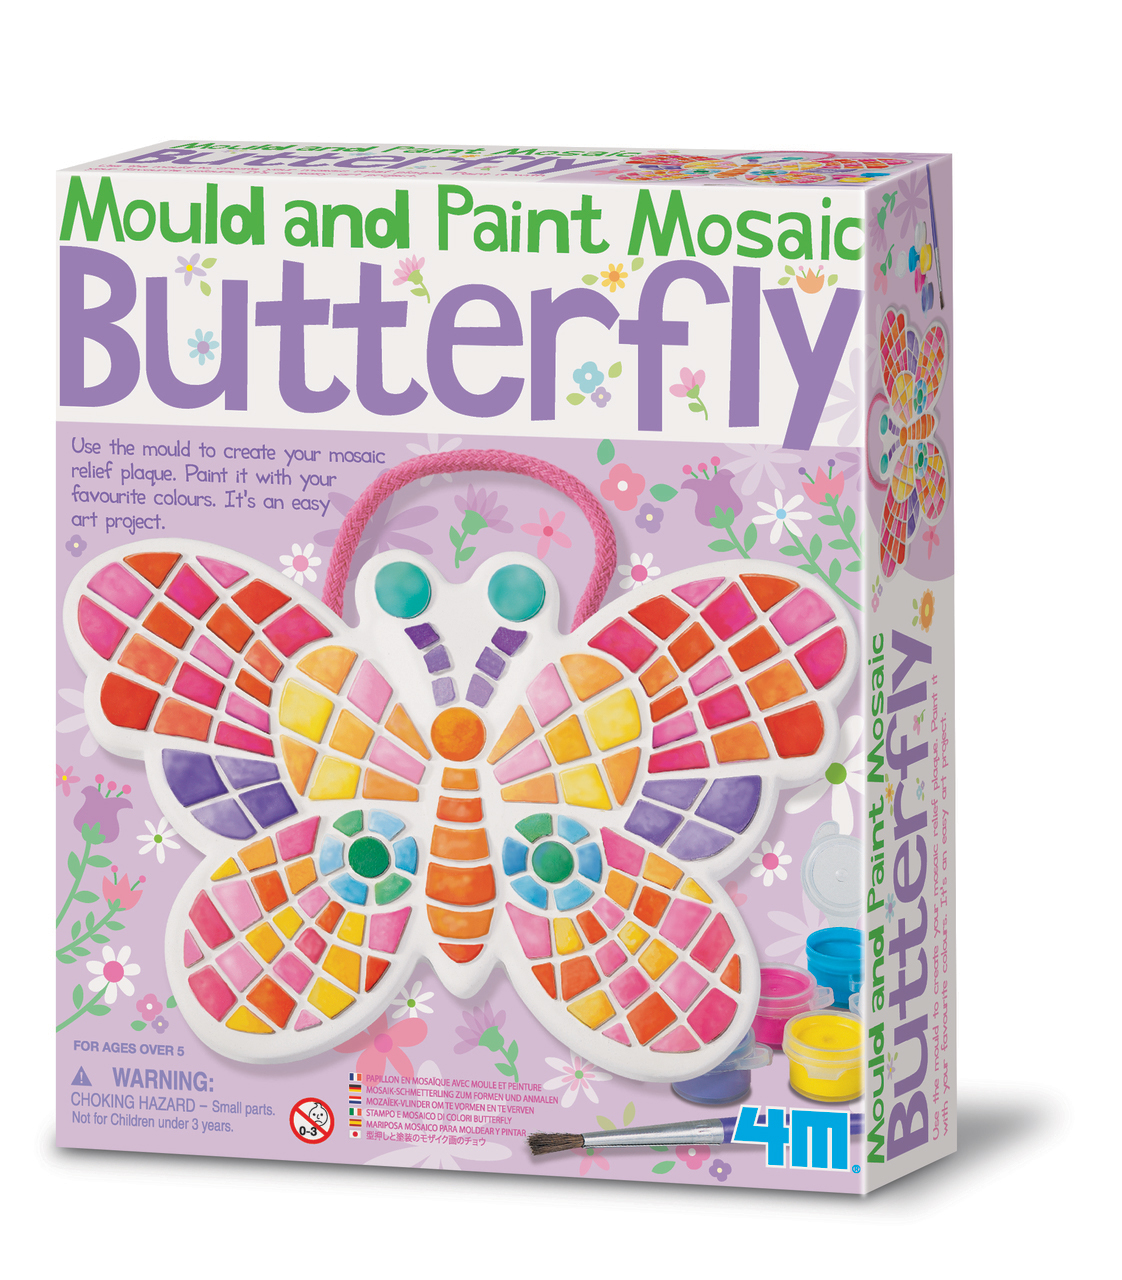 Mould & Paint Mosaic Butterfly Craft Kit - Michigan Native Butterfly Farm